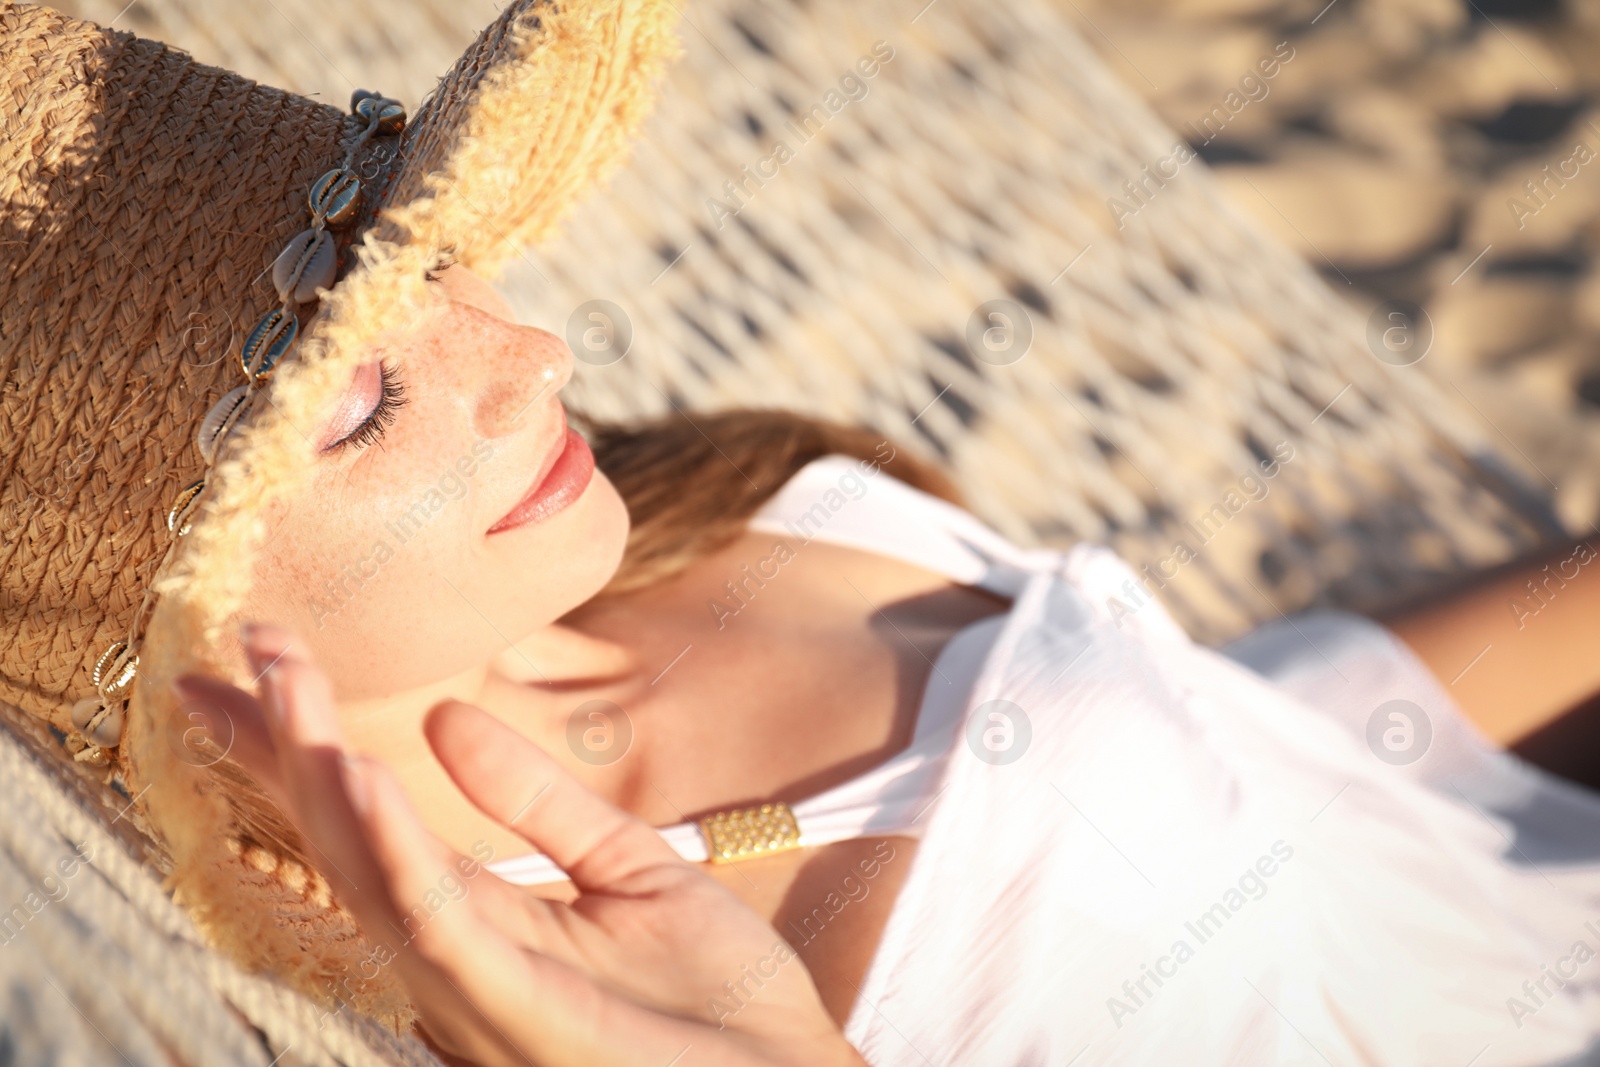 Photo of Young woman relaxing in hammock on beach